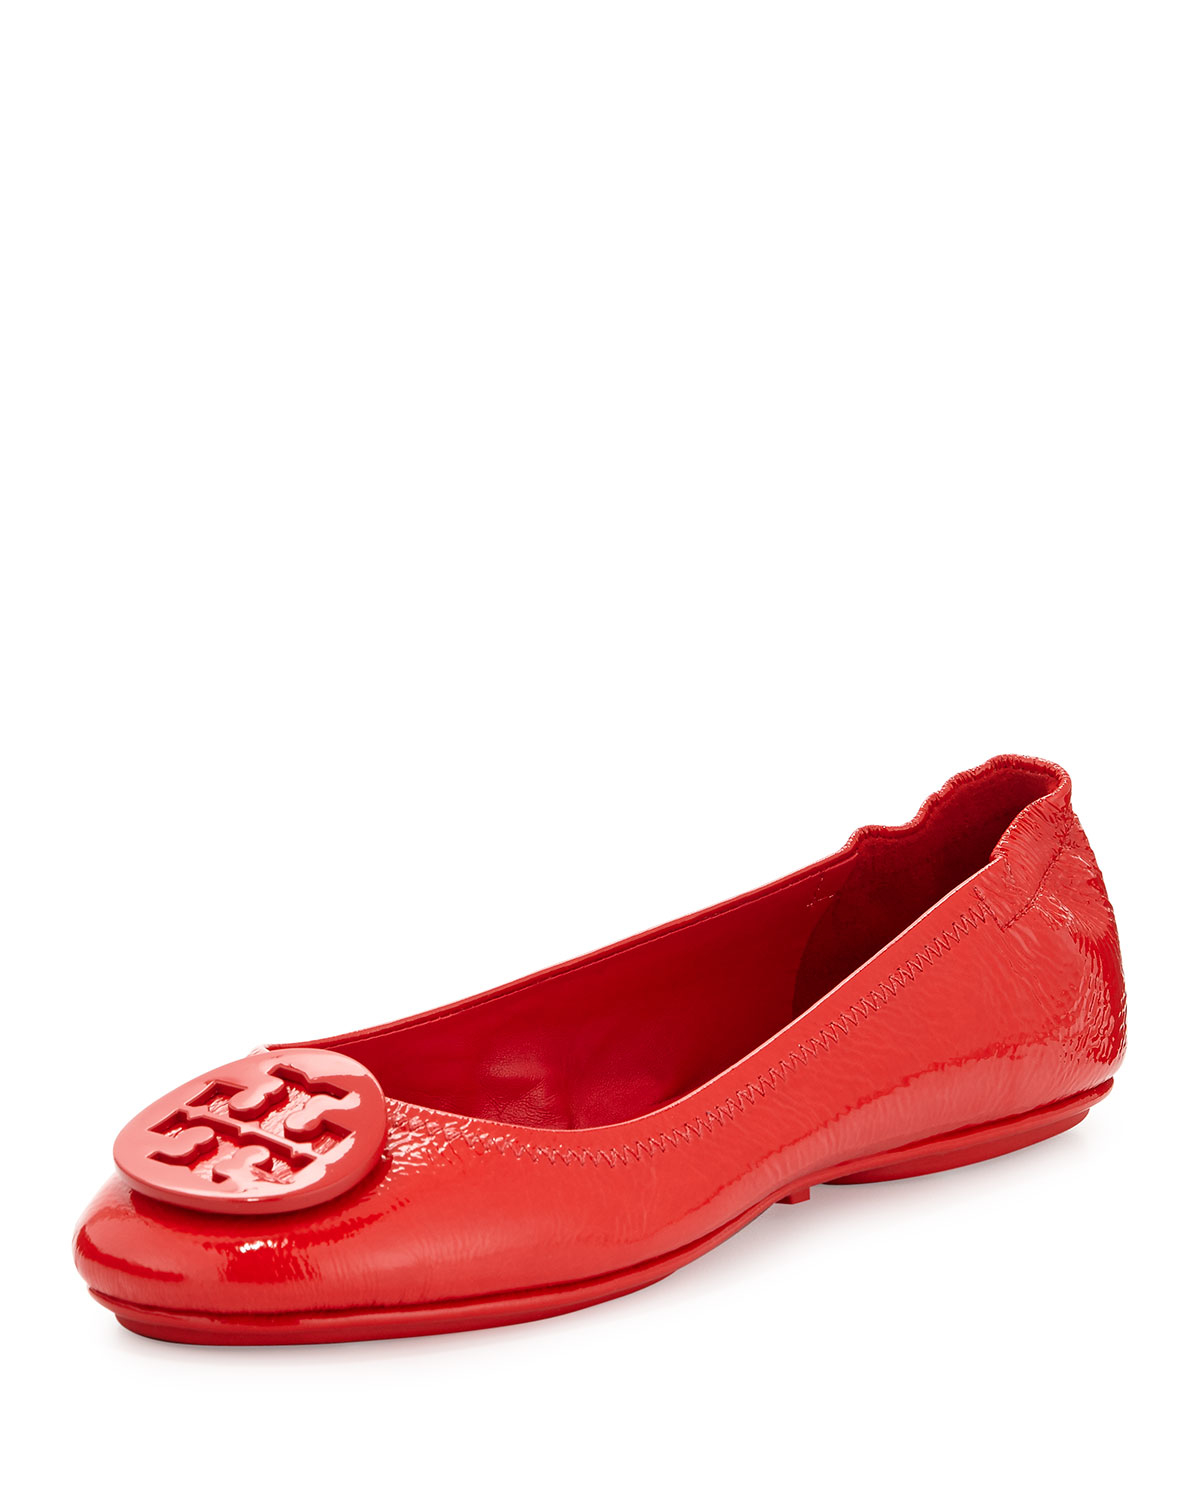 Tory Burch Minnie Patent Leather Travel Ballet Flat in